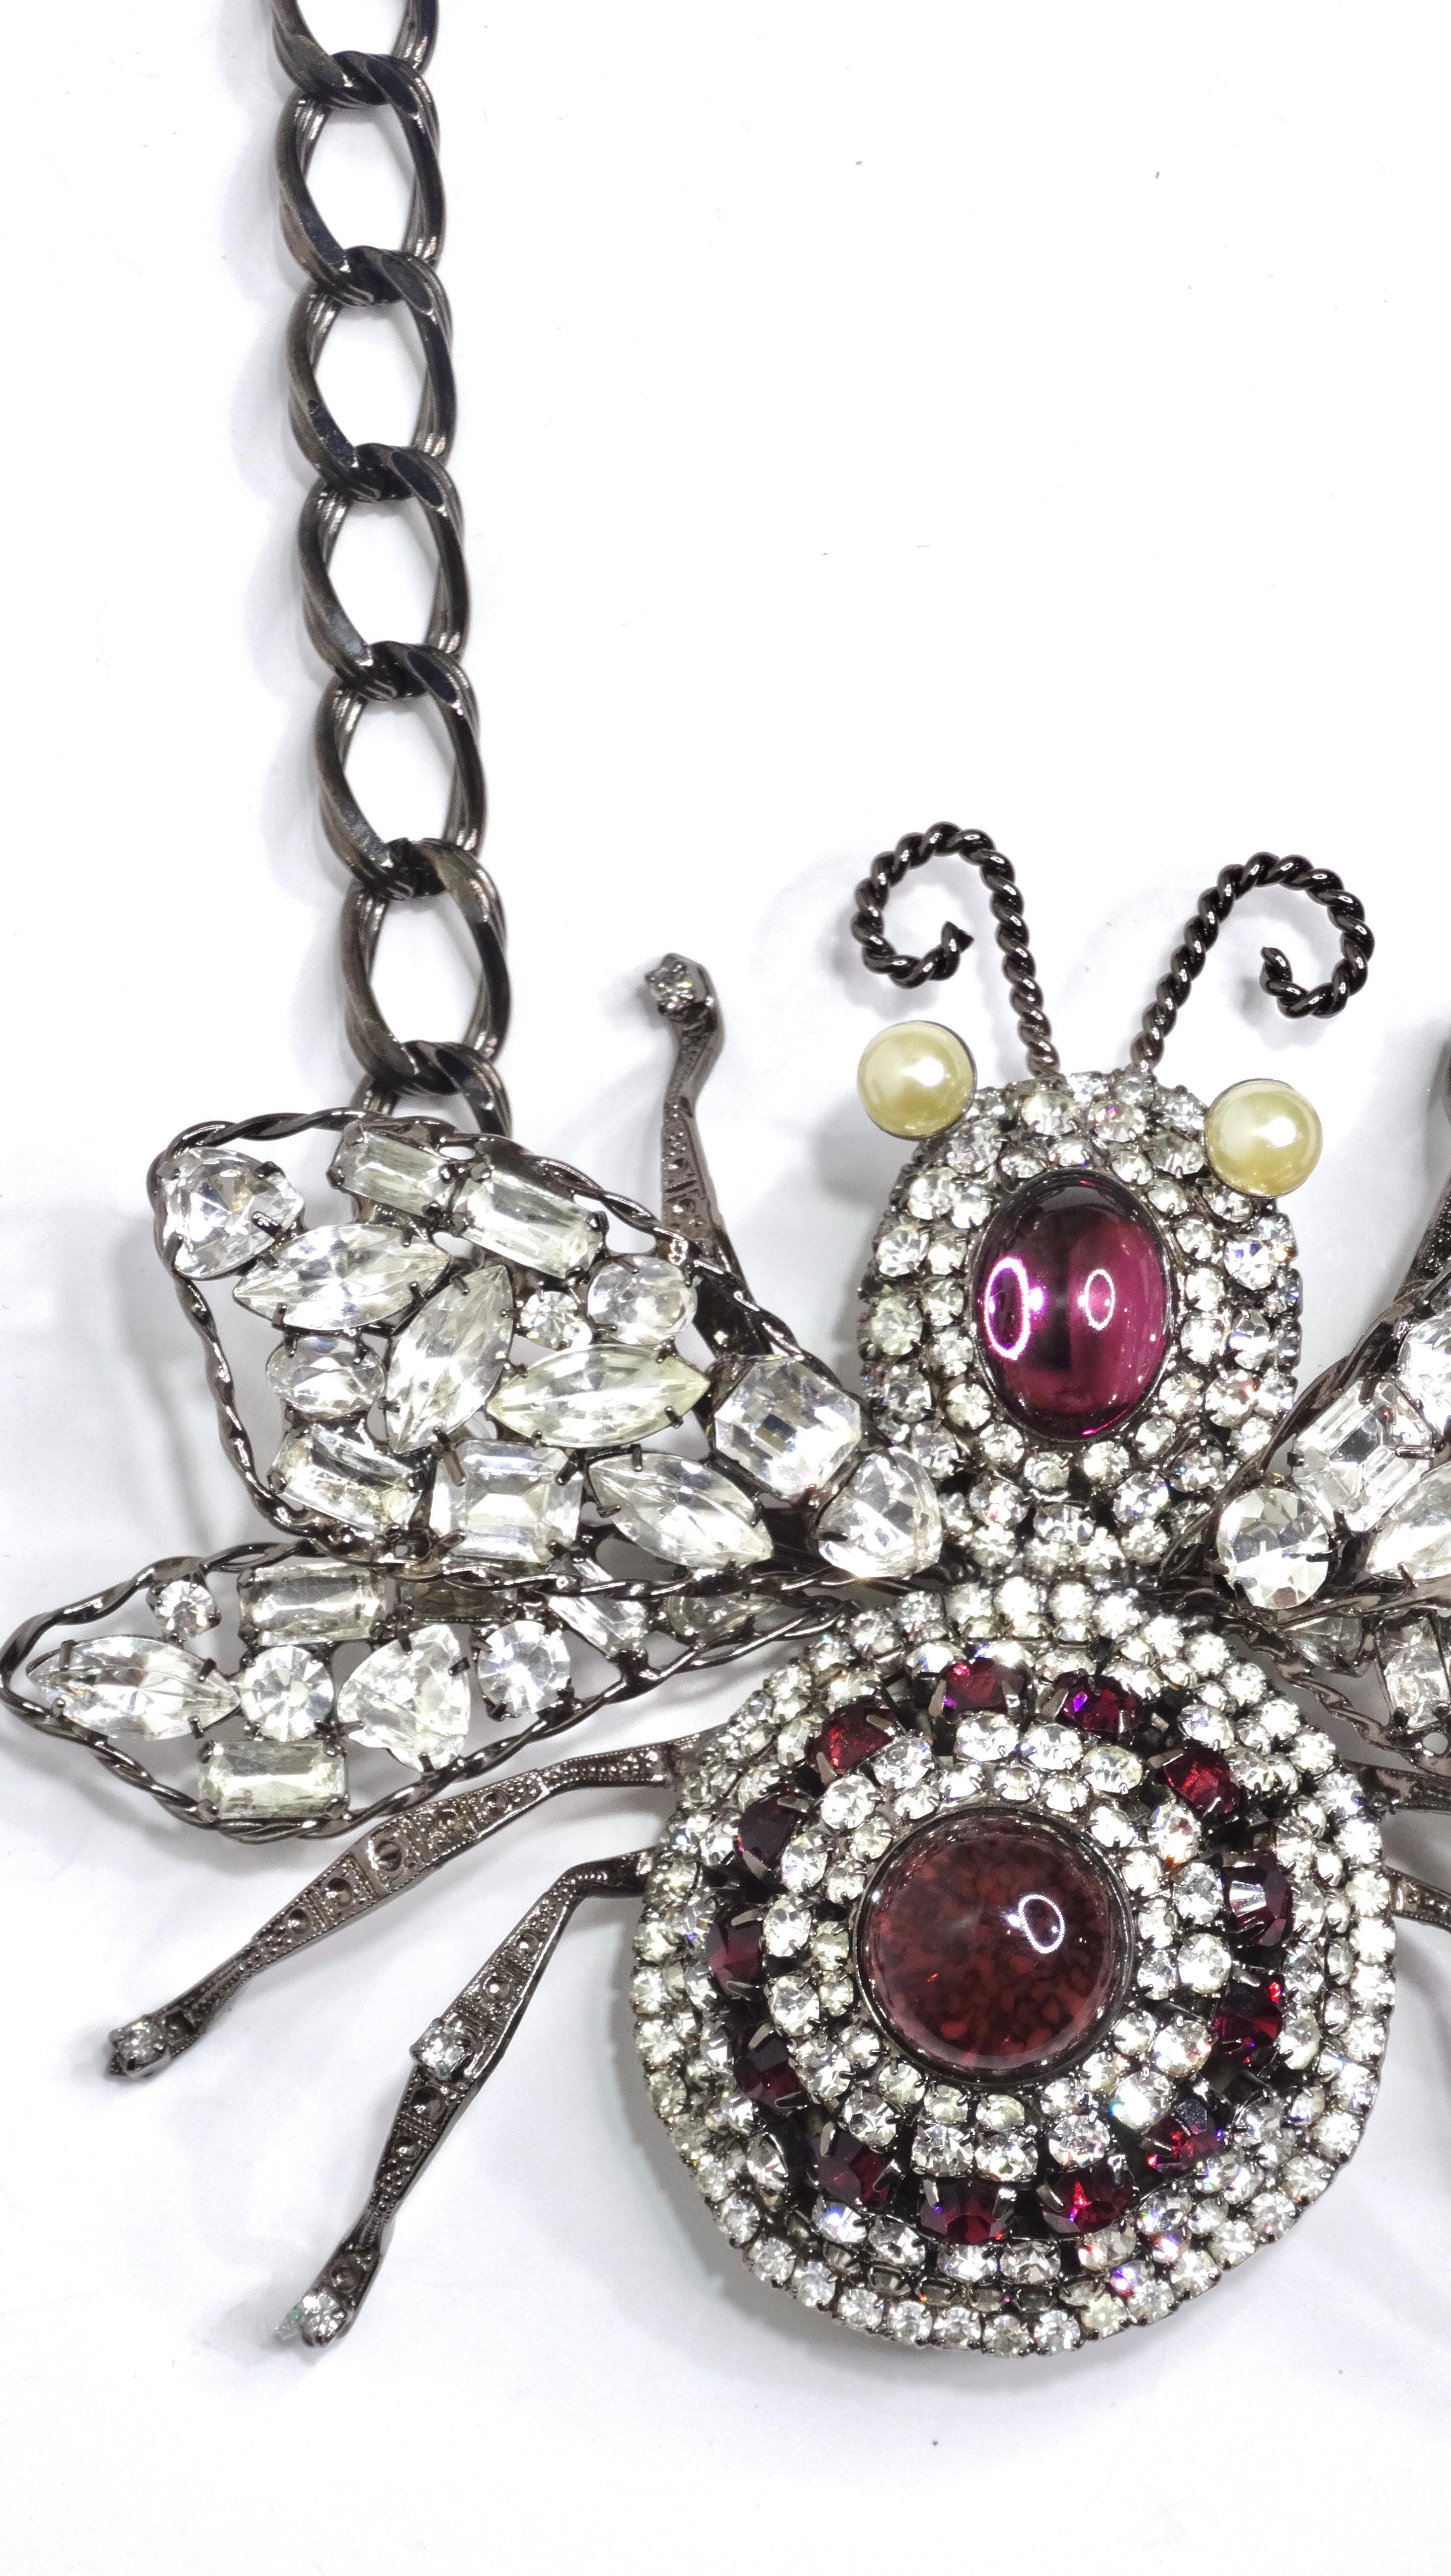 Lawrence Vrba Huge Lux Bee Statement Necklace In Excellent Condition For Sale In Scottsdale, AZ